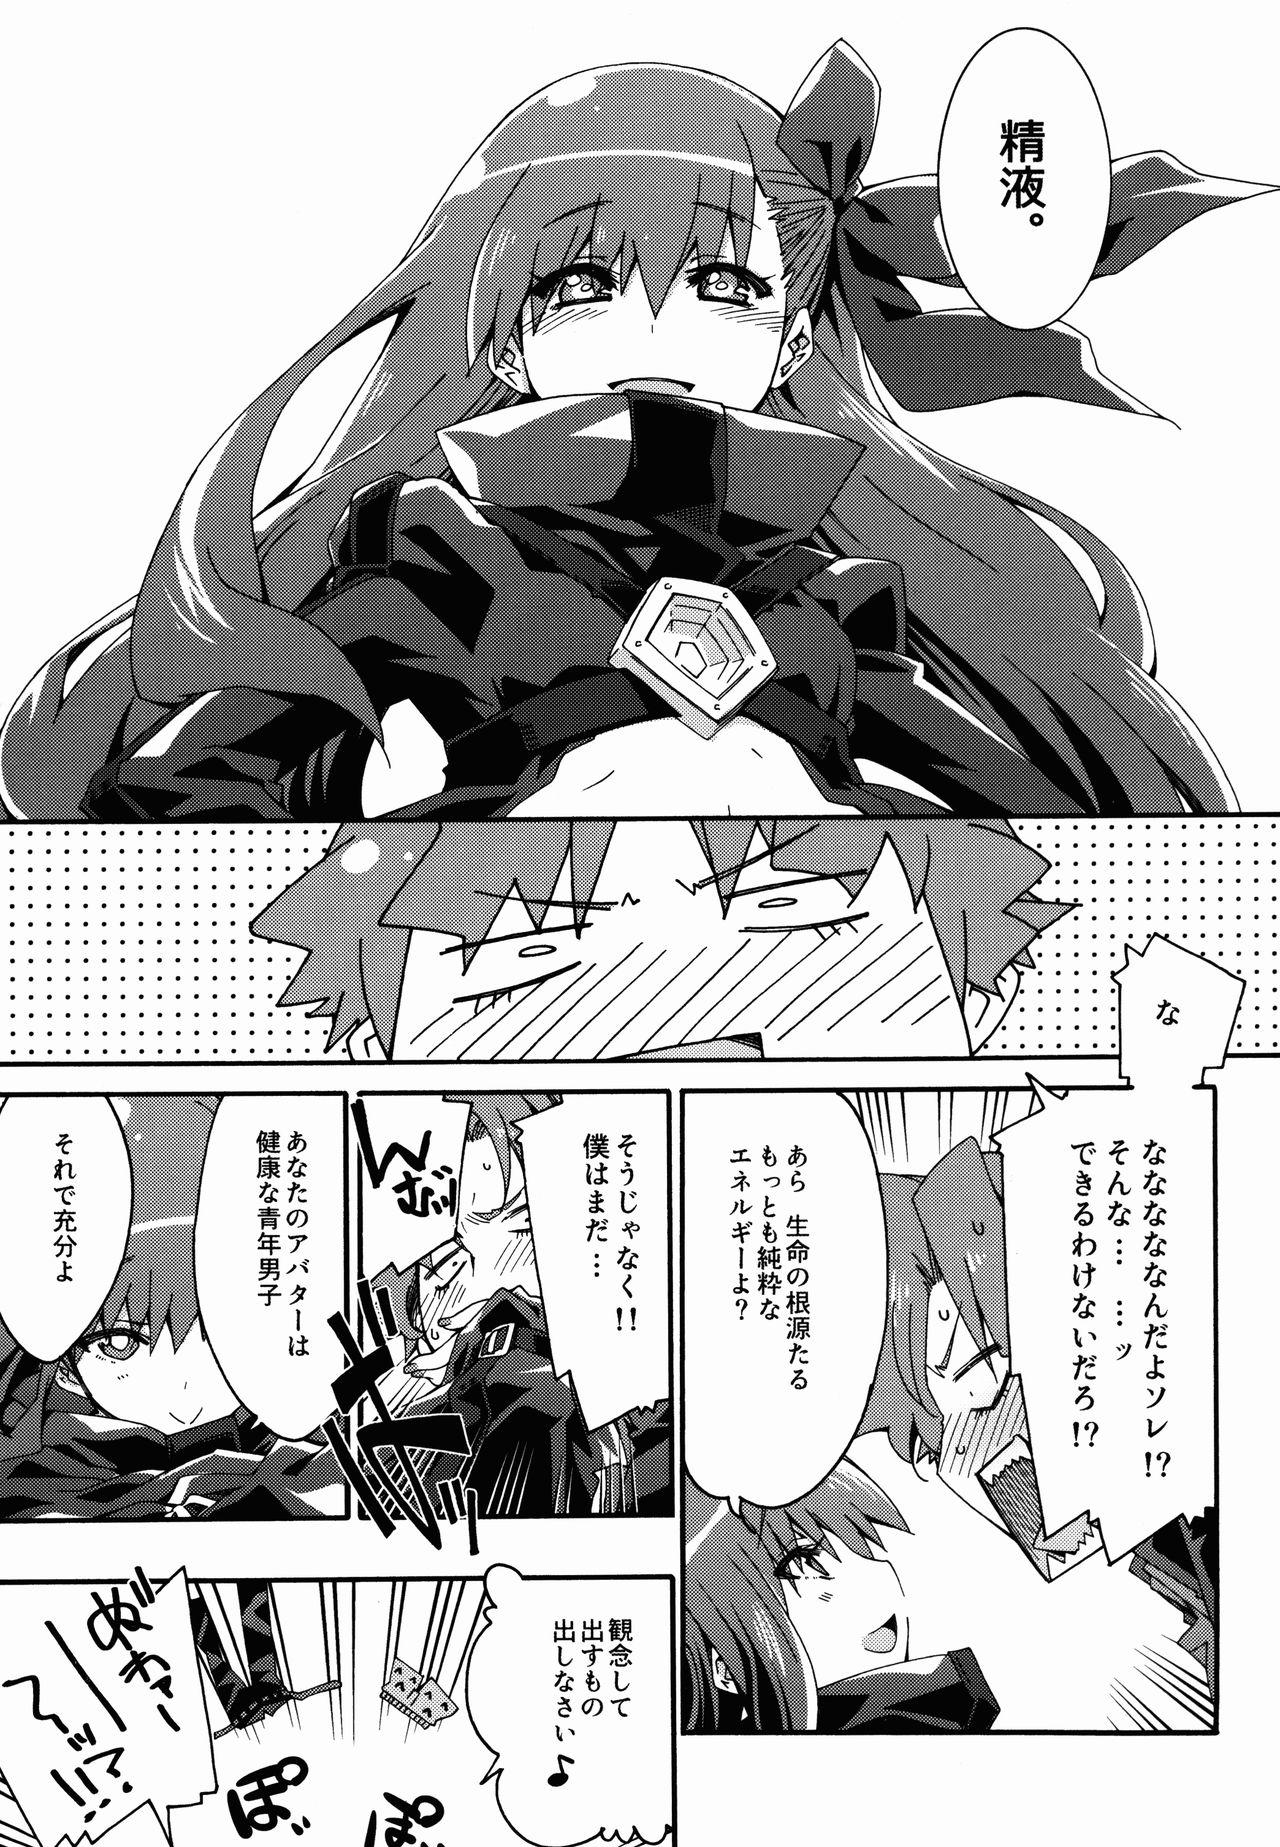 Bangbros Melty/kiss - Fate extra Stockings - Page 11